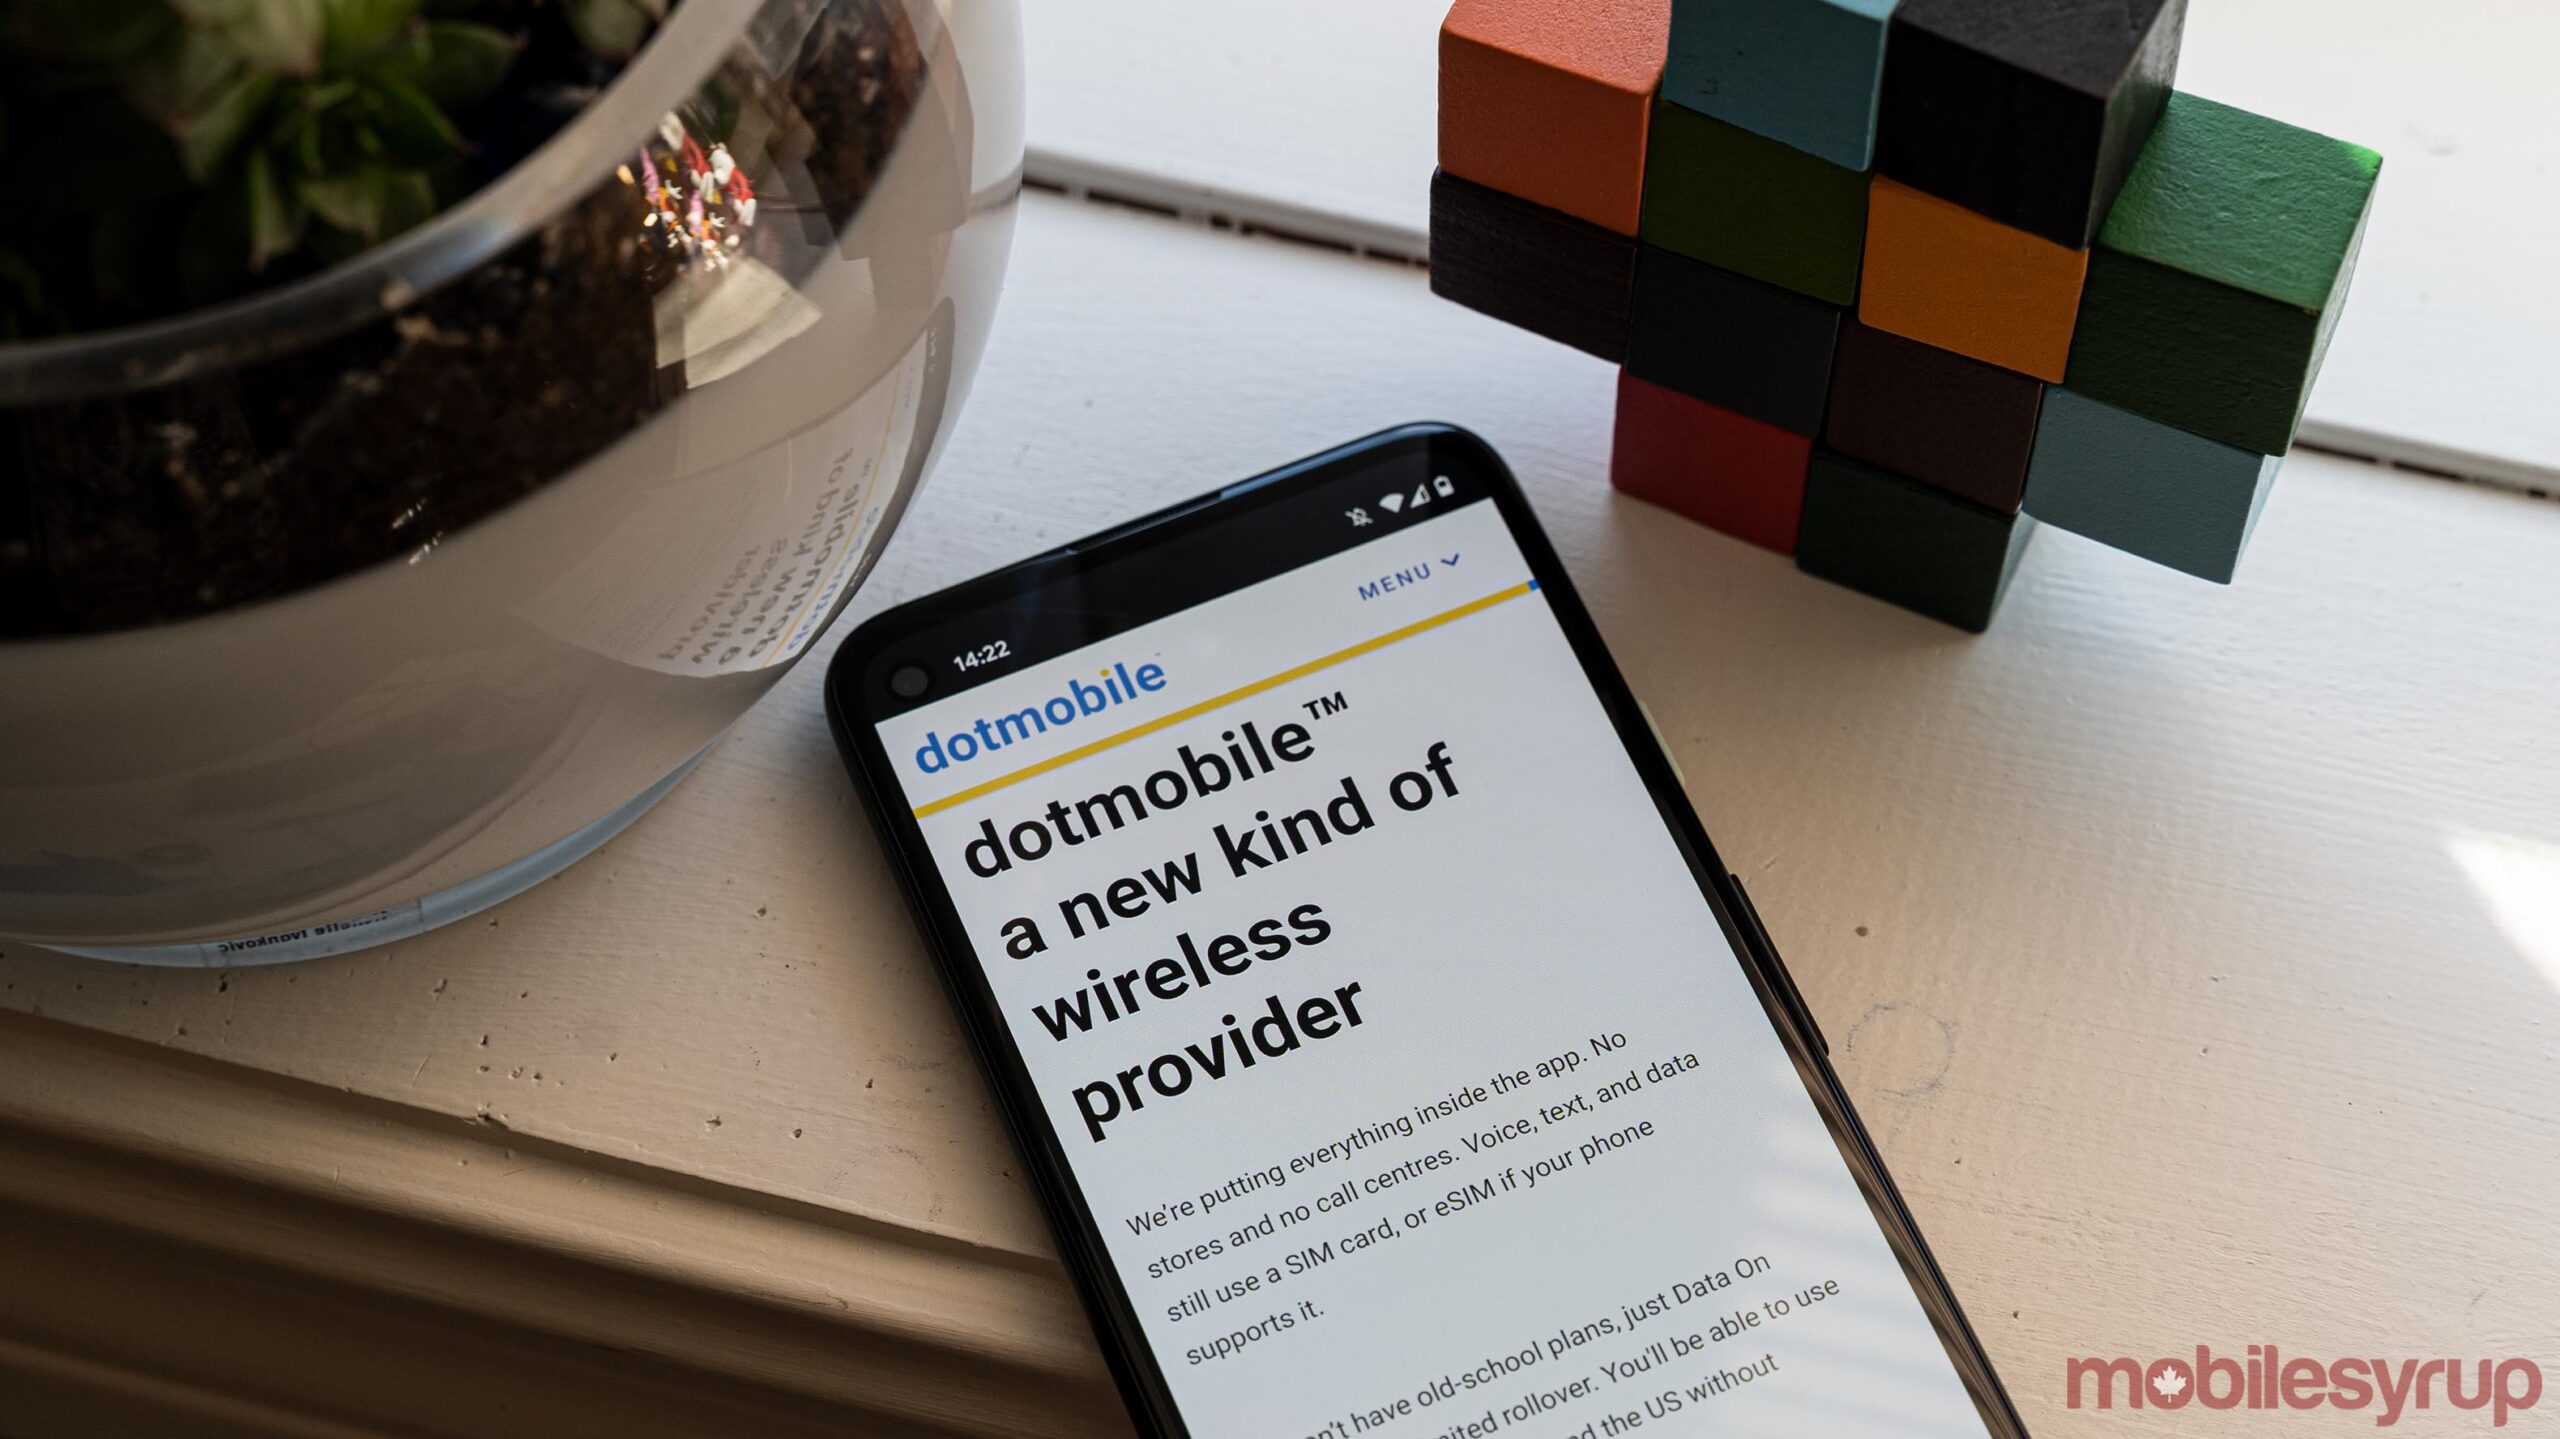 dotmobile website on Android